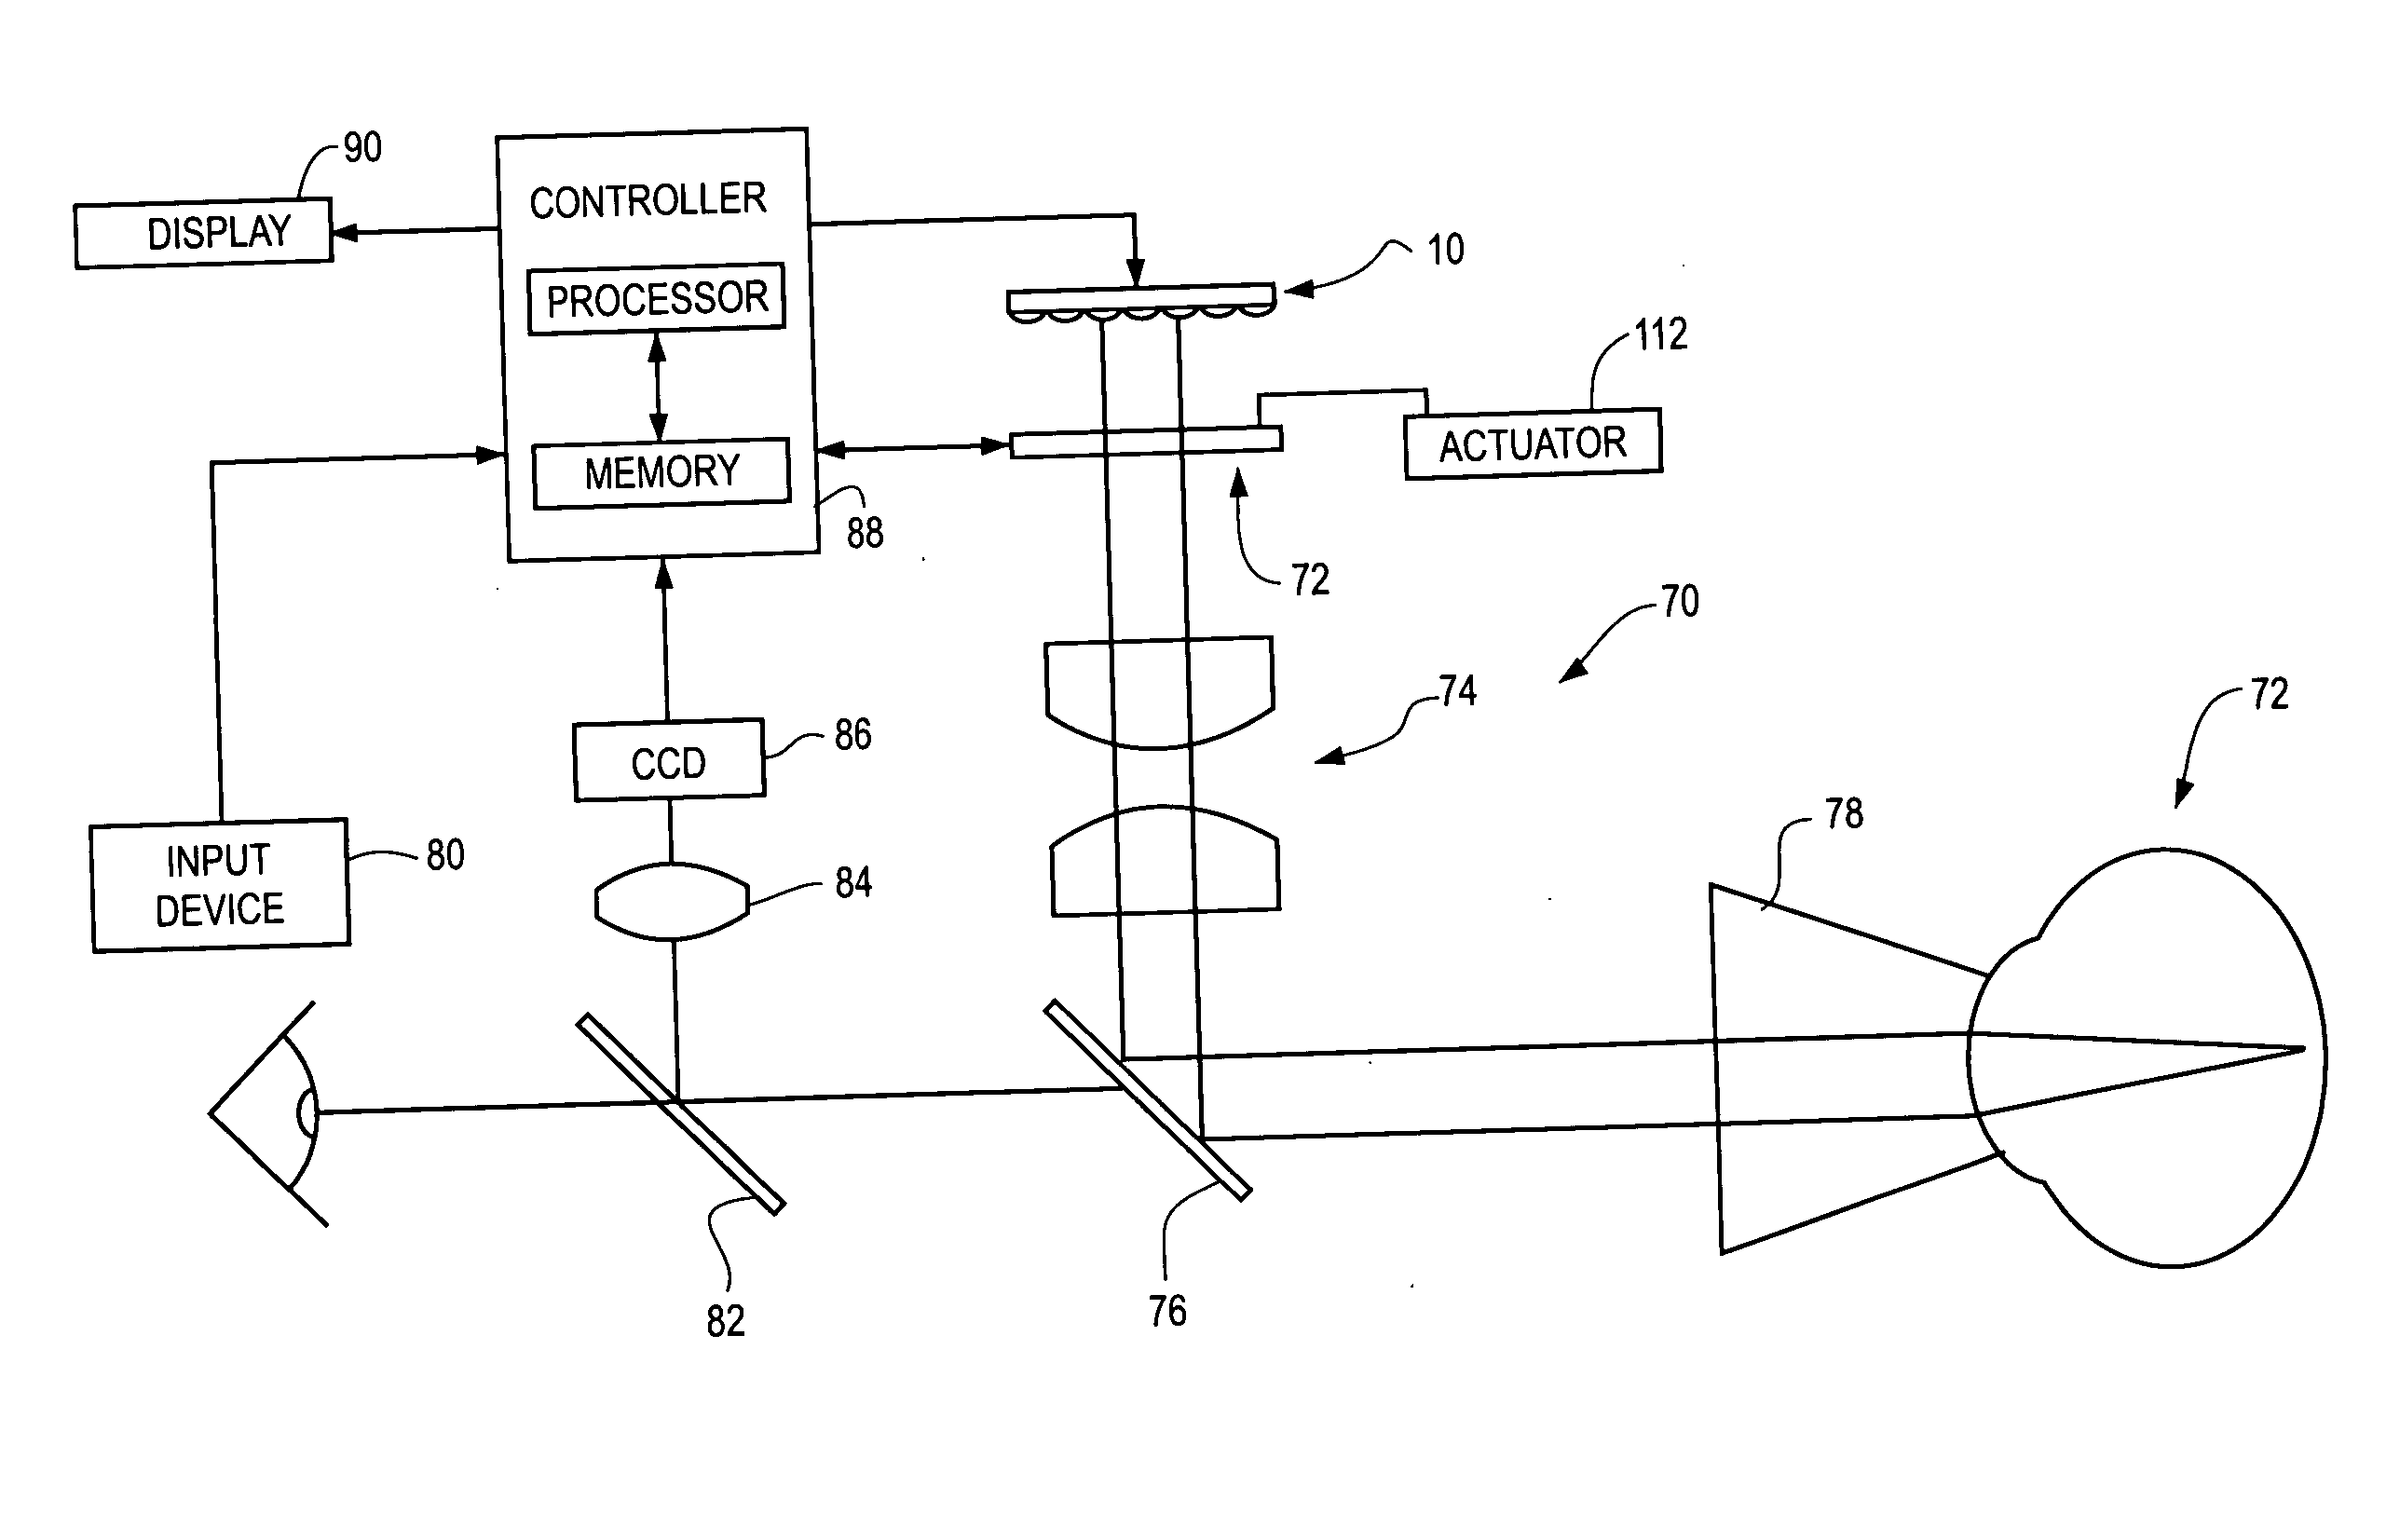 PDT apparatus with an addressable LED array for therapy and aiming